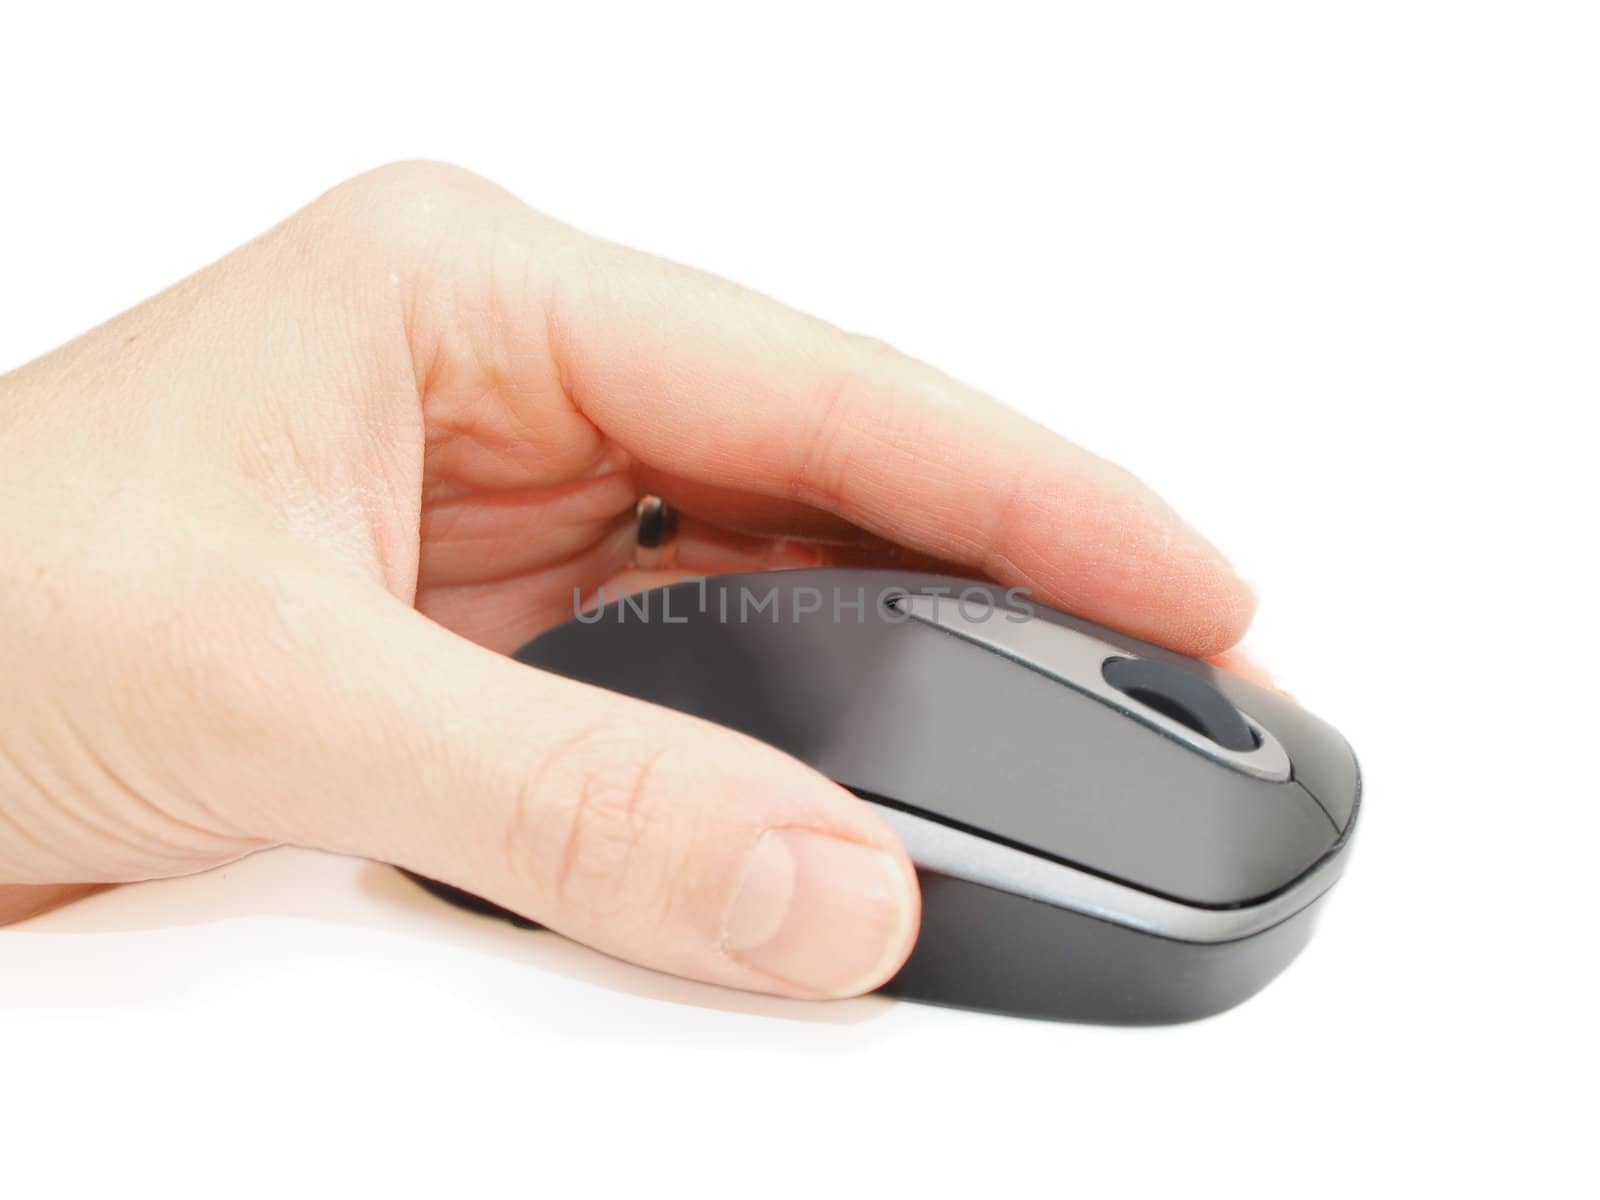 Wireless computer mouse with a hand on top 